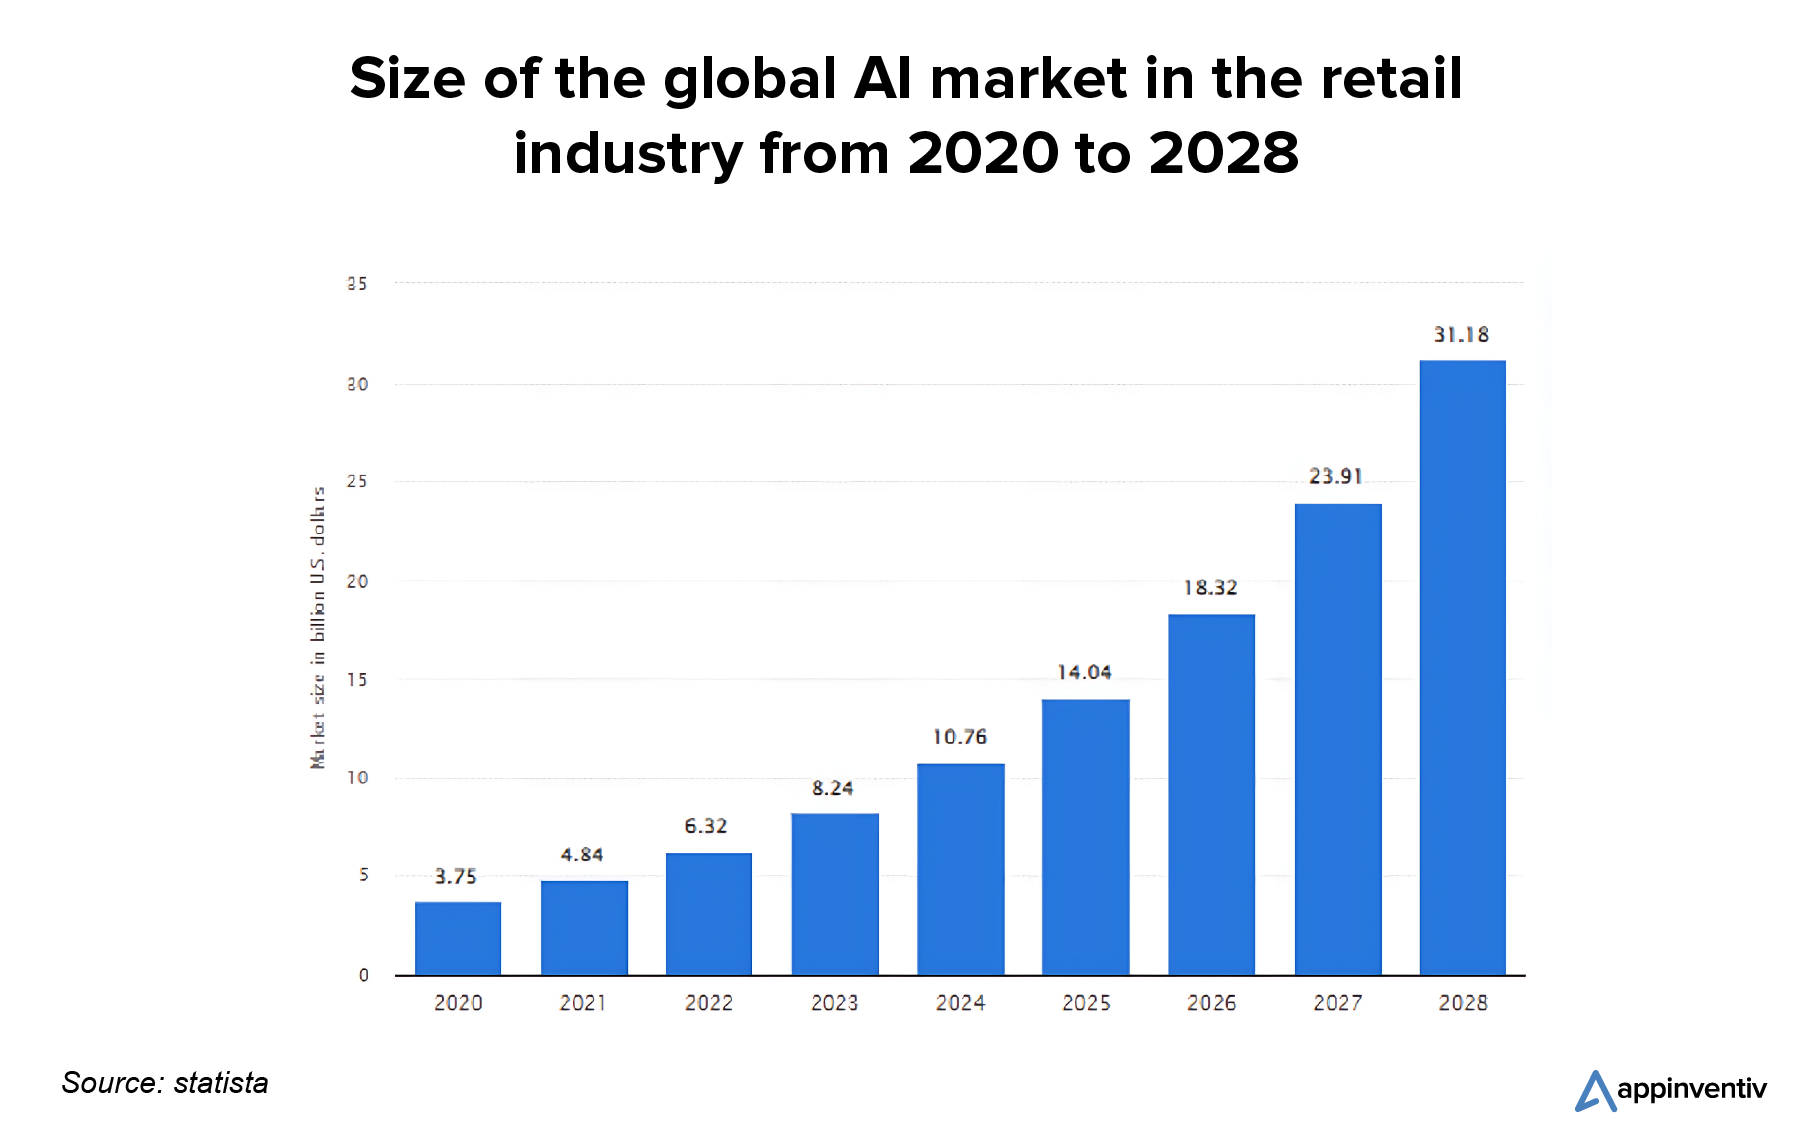 Size of the global AI market in the retail industry from 2020 to 2028